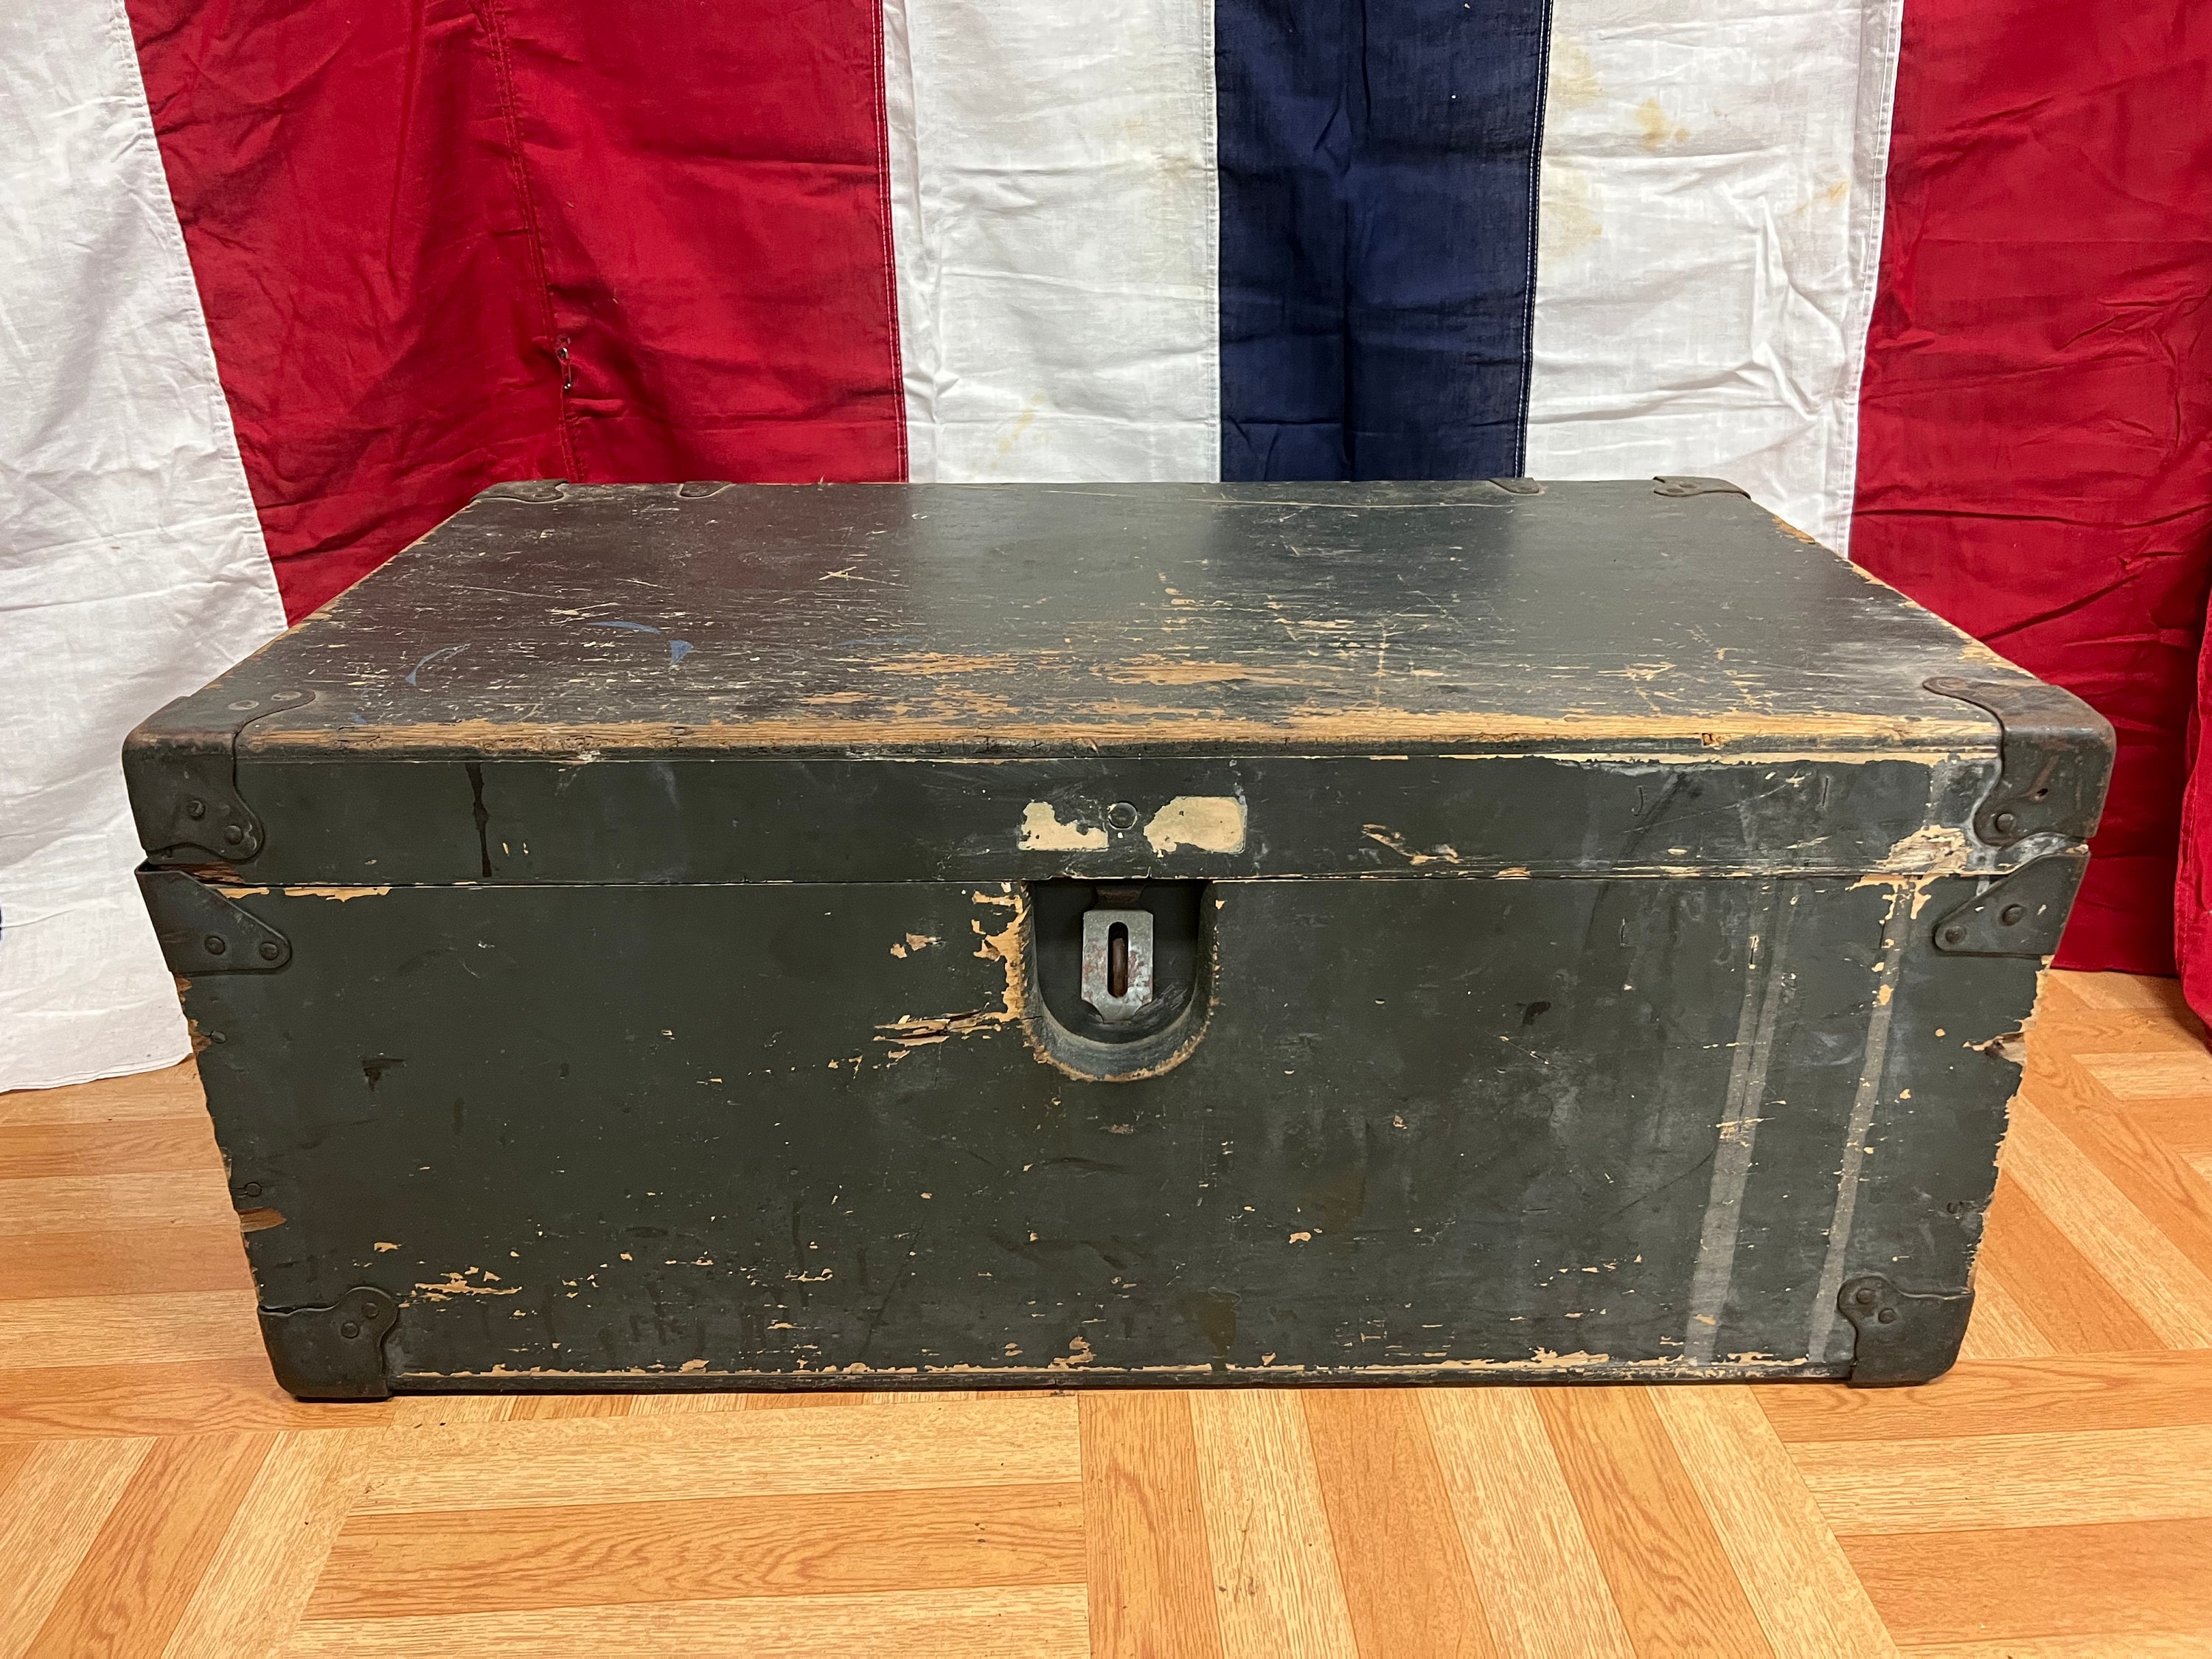 Sold at Auction: 3 vintage green military footlocker storage trunks incl. 1  1951 Green Bingley trunk and more